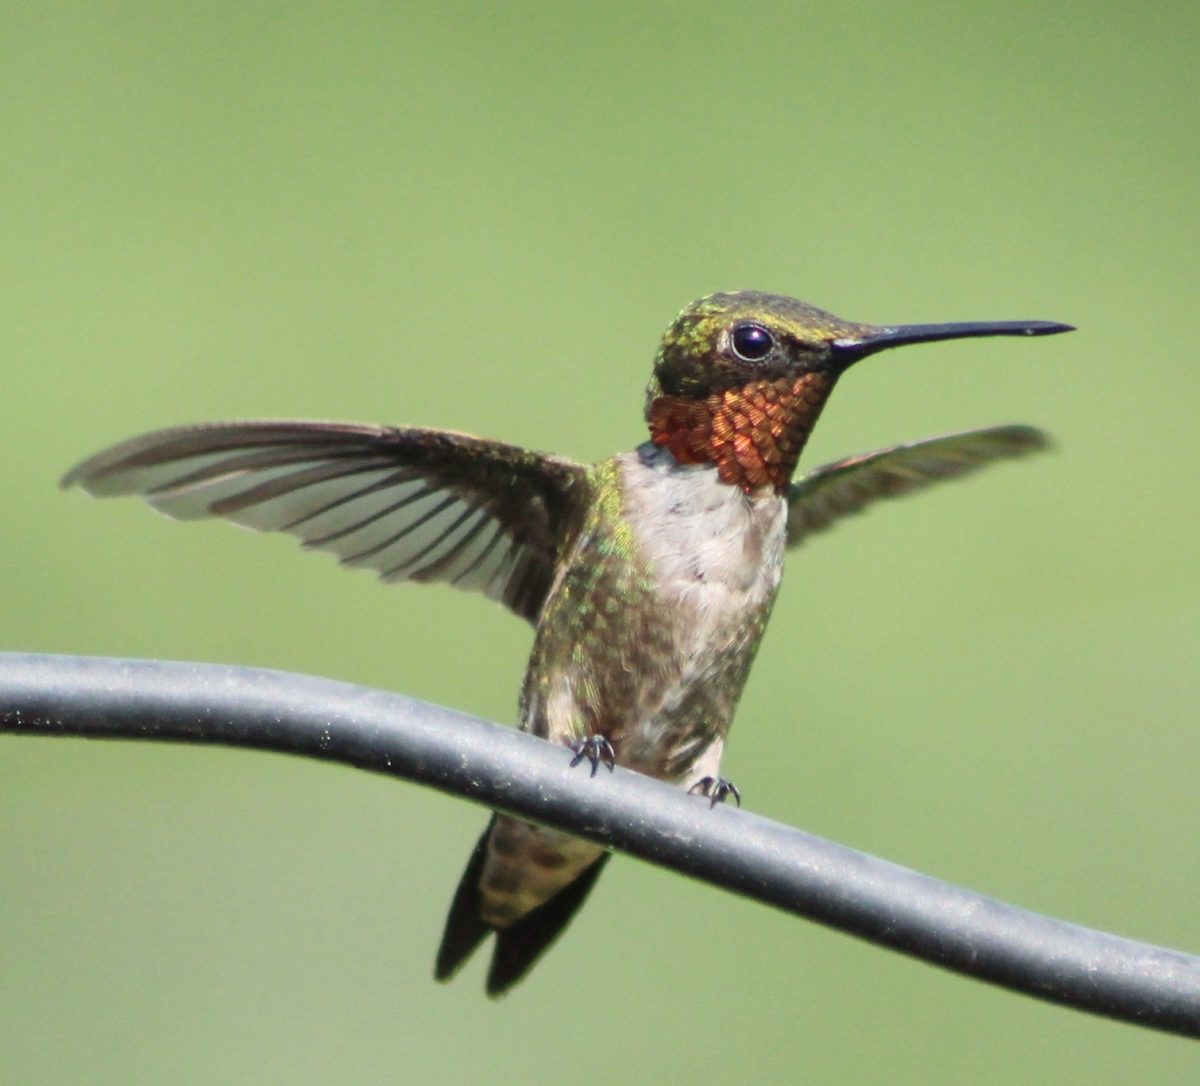 Attract More Hummingbirds for Less Money